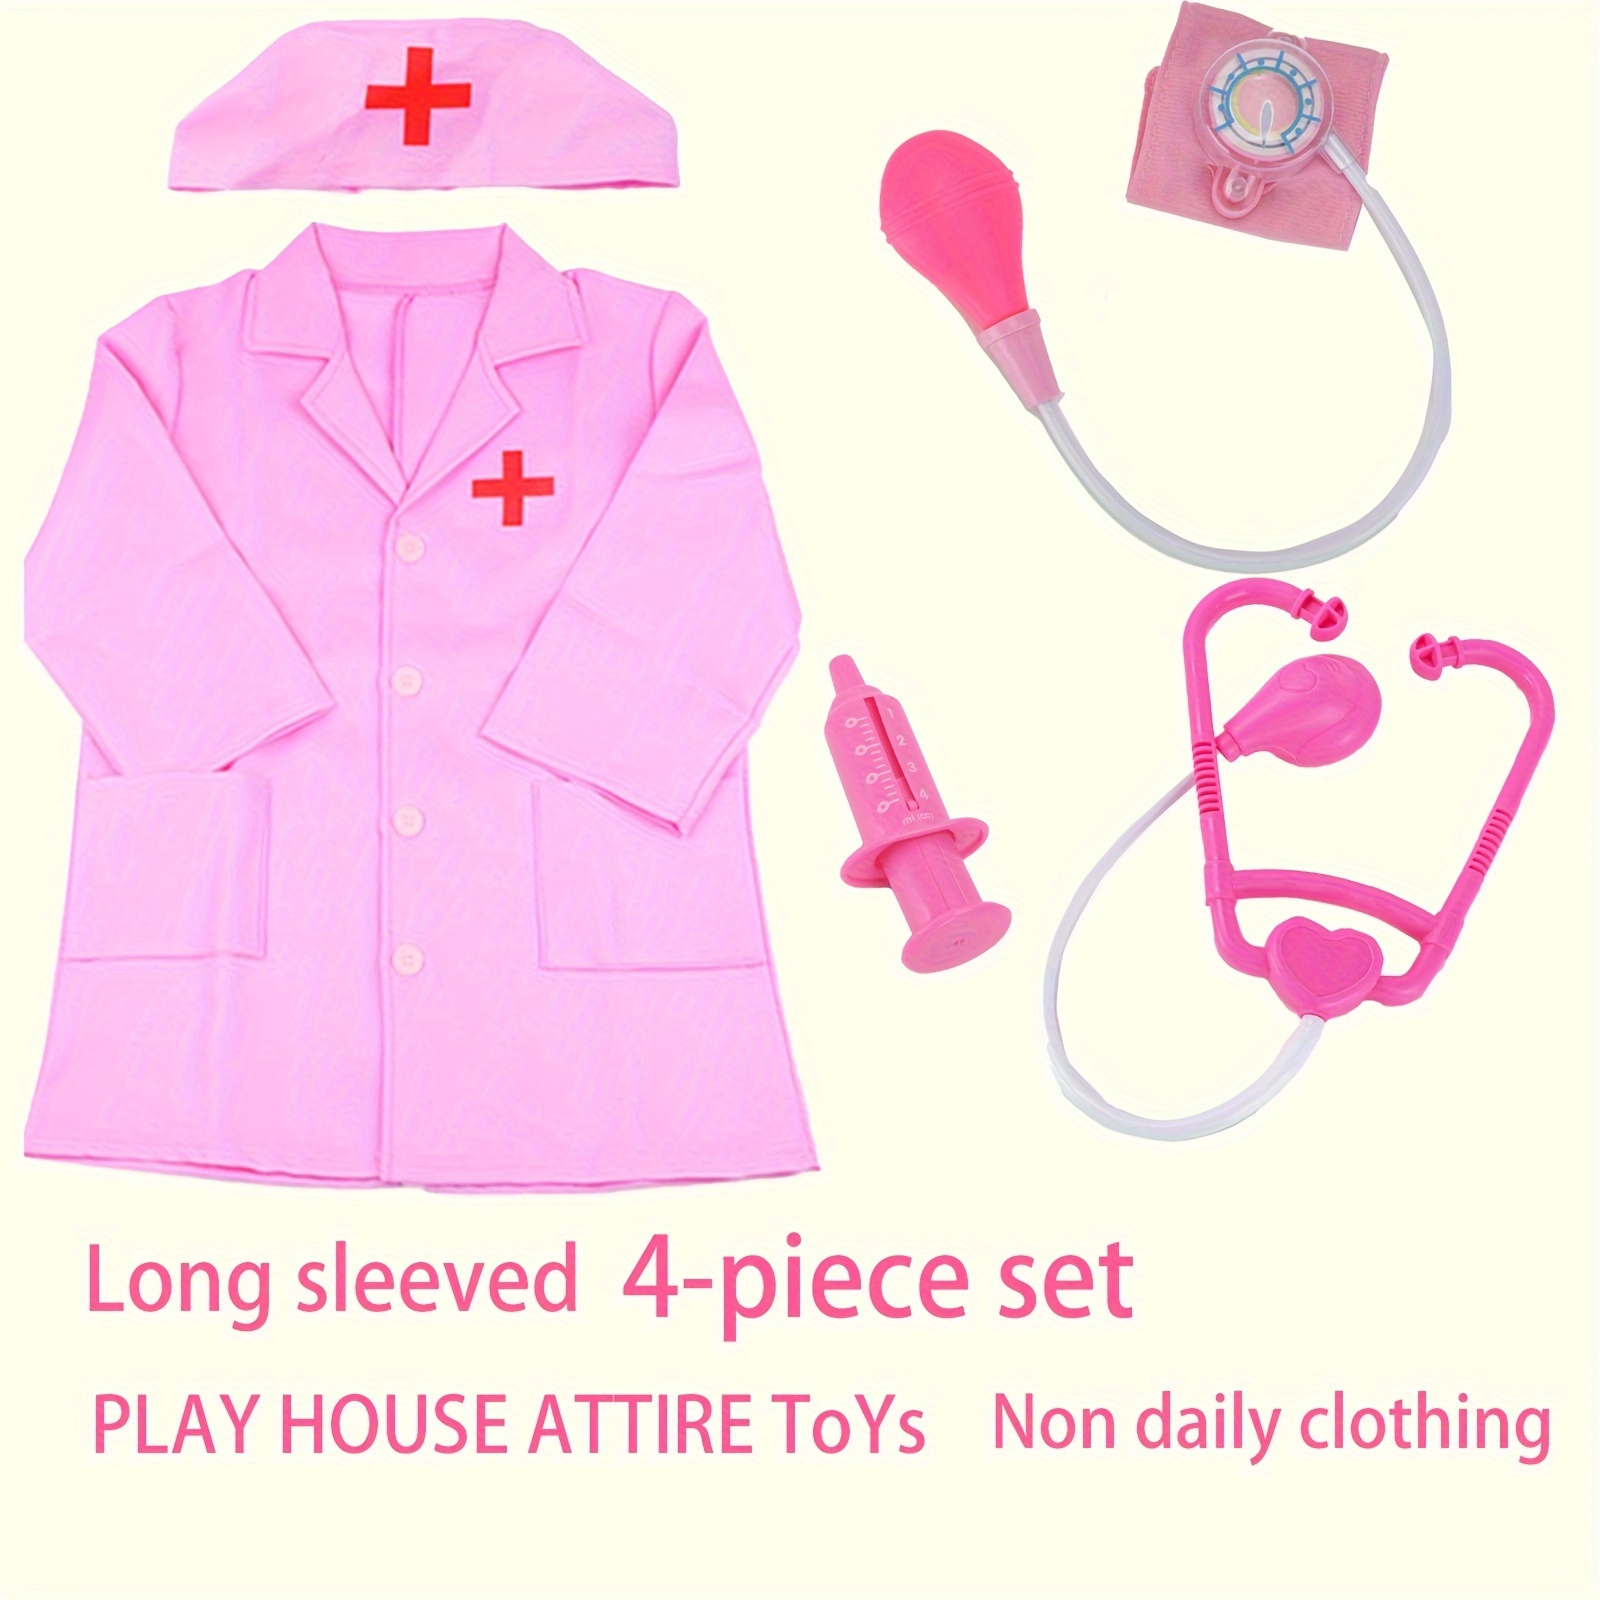 Children's Simulation Mini Family Doctor Nurse Blood Pressure Monitor  Medical Boys And Girls Fun Games Role-playing Toys